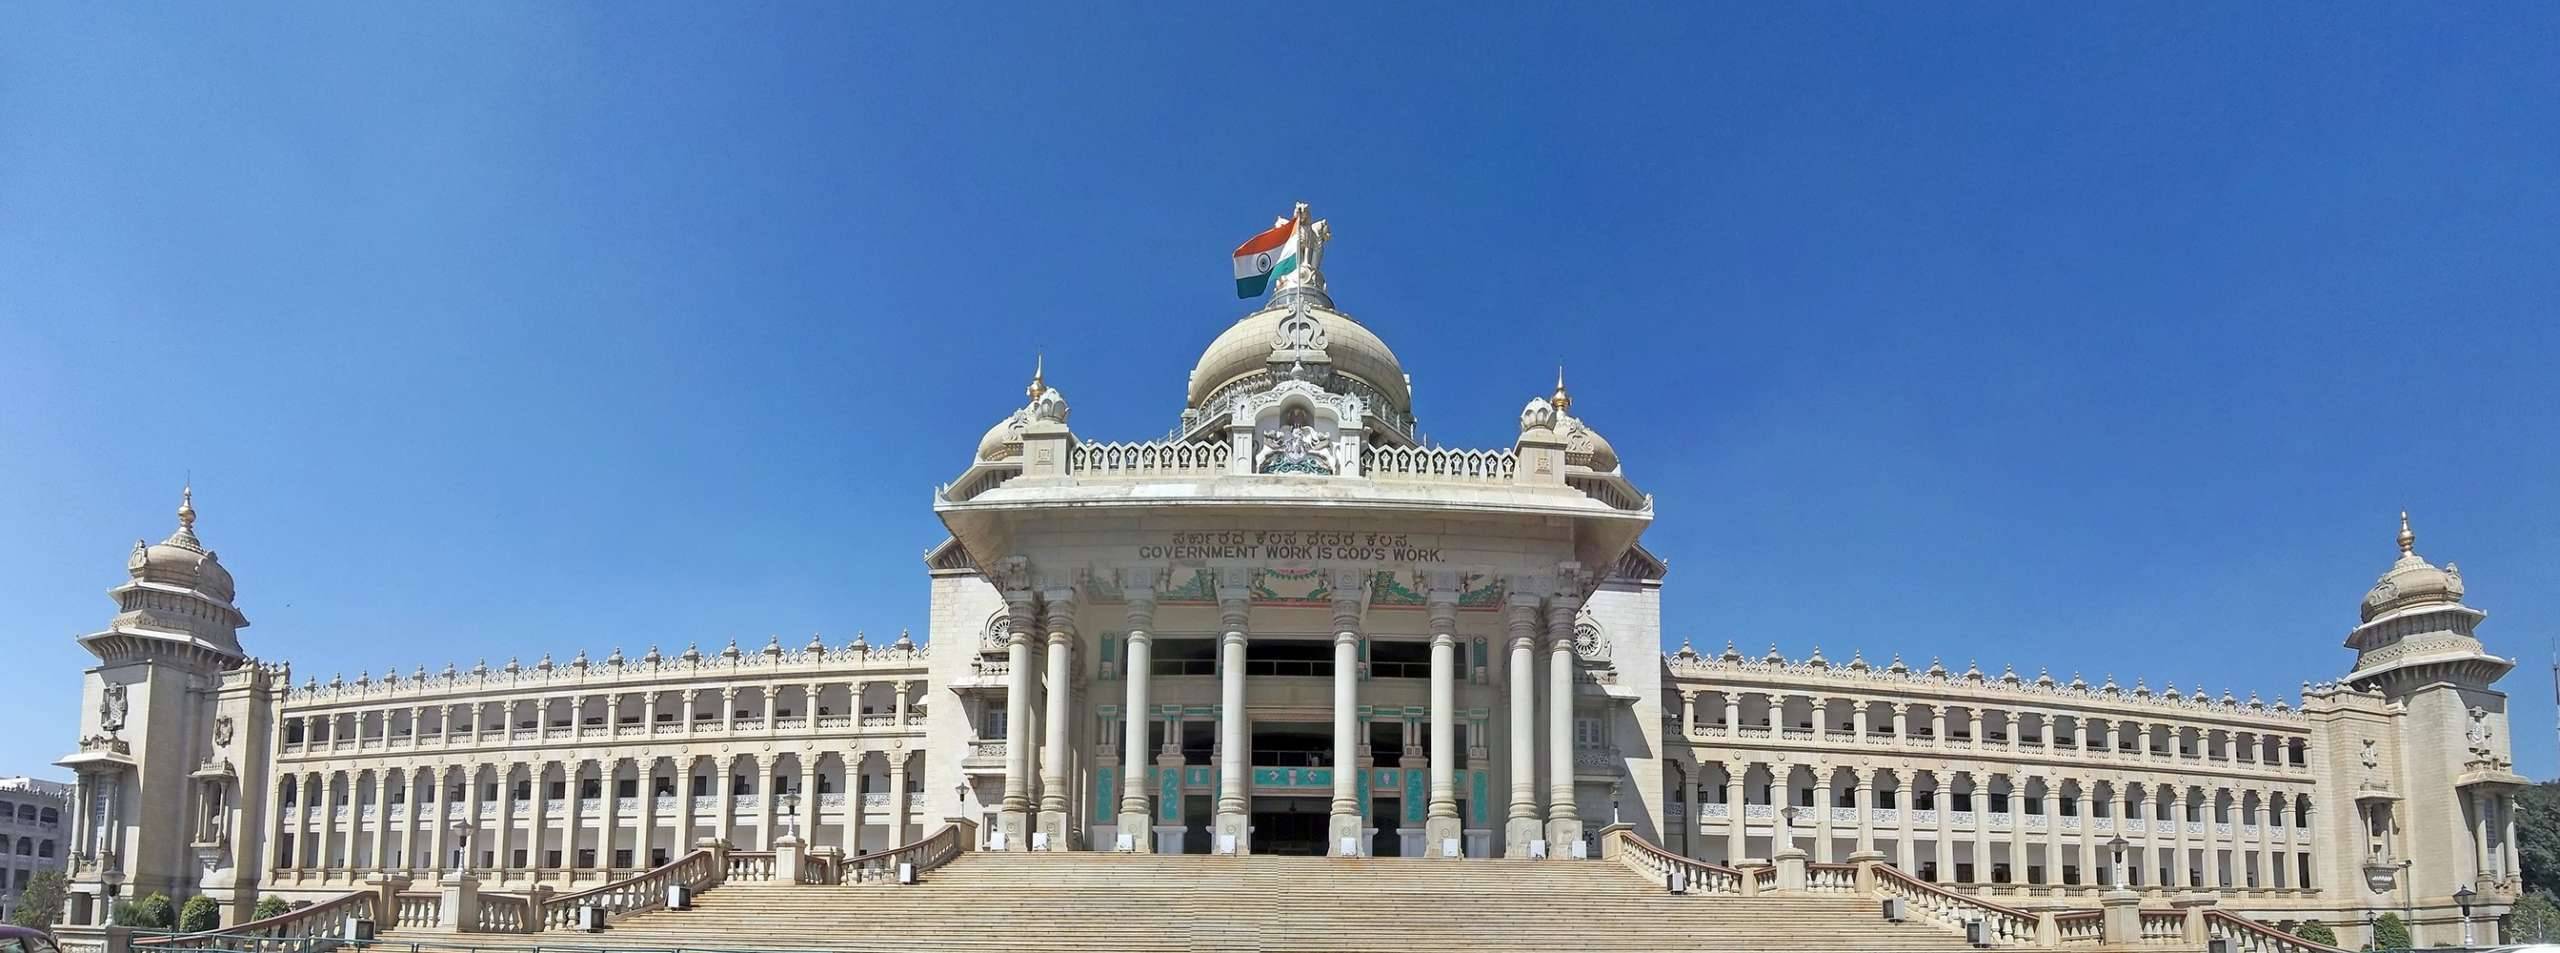 This Image depicts the Vidhaana Soudha of Karnatakaa.This Image is relevant as the article deals with the Goonda Act passed by Karnatakaa Assembly. Click on this Image for more Information.